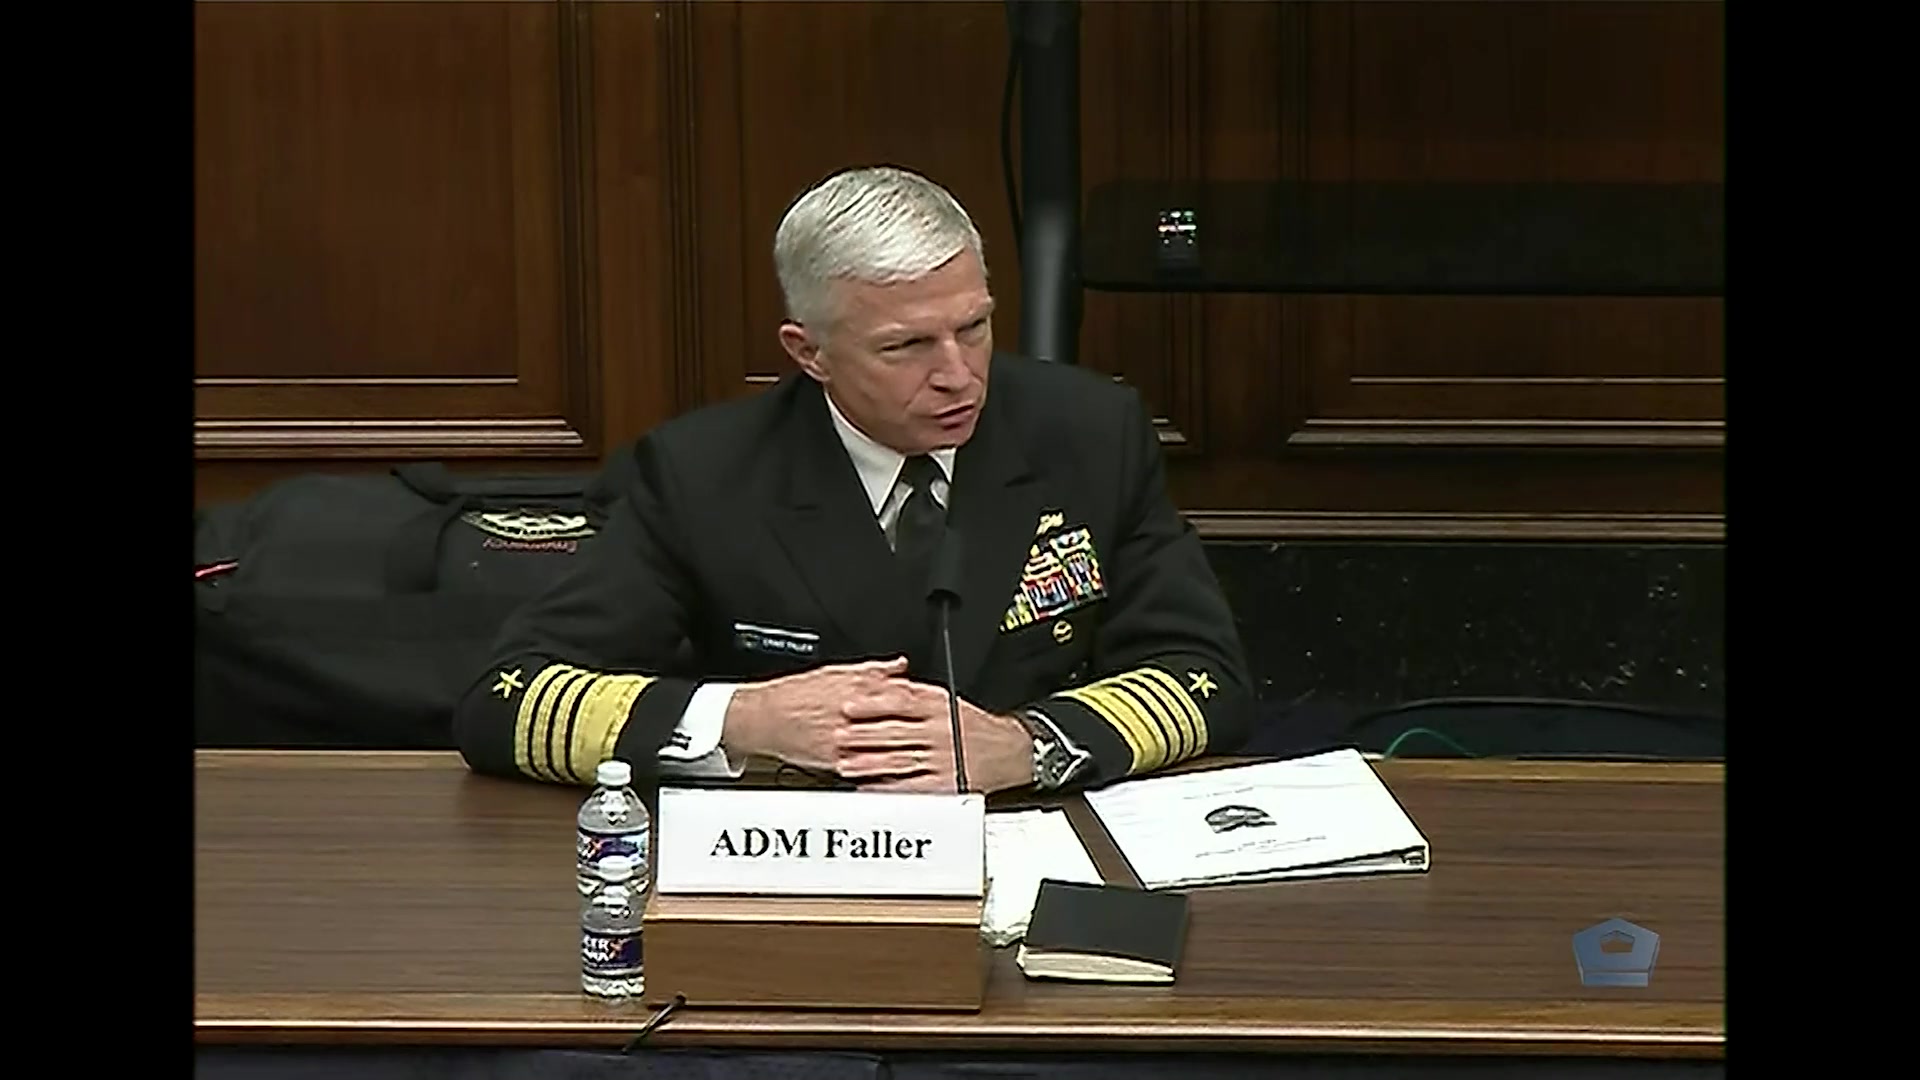 Robert G. Salesses, performing the duties of assistant secretary of defense for homeland defense and global security; Navy Adm. Craig S. Faller, U.S. Southern Command commander; and Air Force Gen. Glen D. VanHerck, U.S. Northern Command and North American Aerospace Defense Command commander, speak before the House Armed Services Committee about national security challenges and force posture in the Southcom and Northcom areas of operation and related policy, April 14, 2021.

Part 1 of 2.